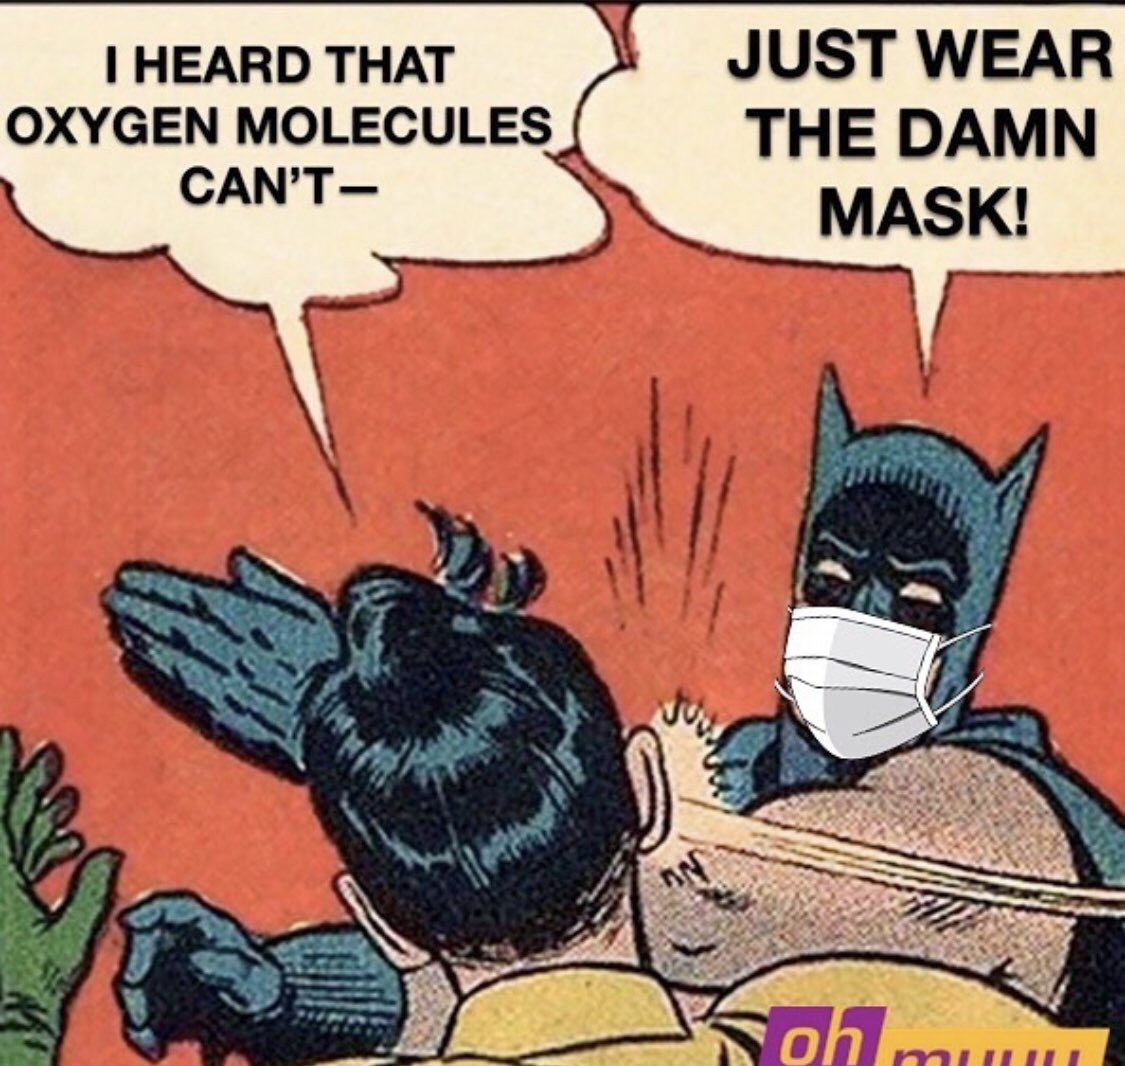 wear mask for safety